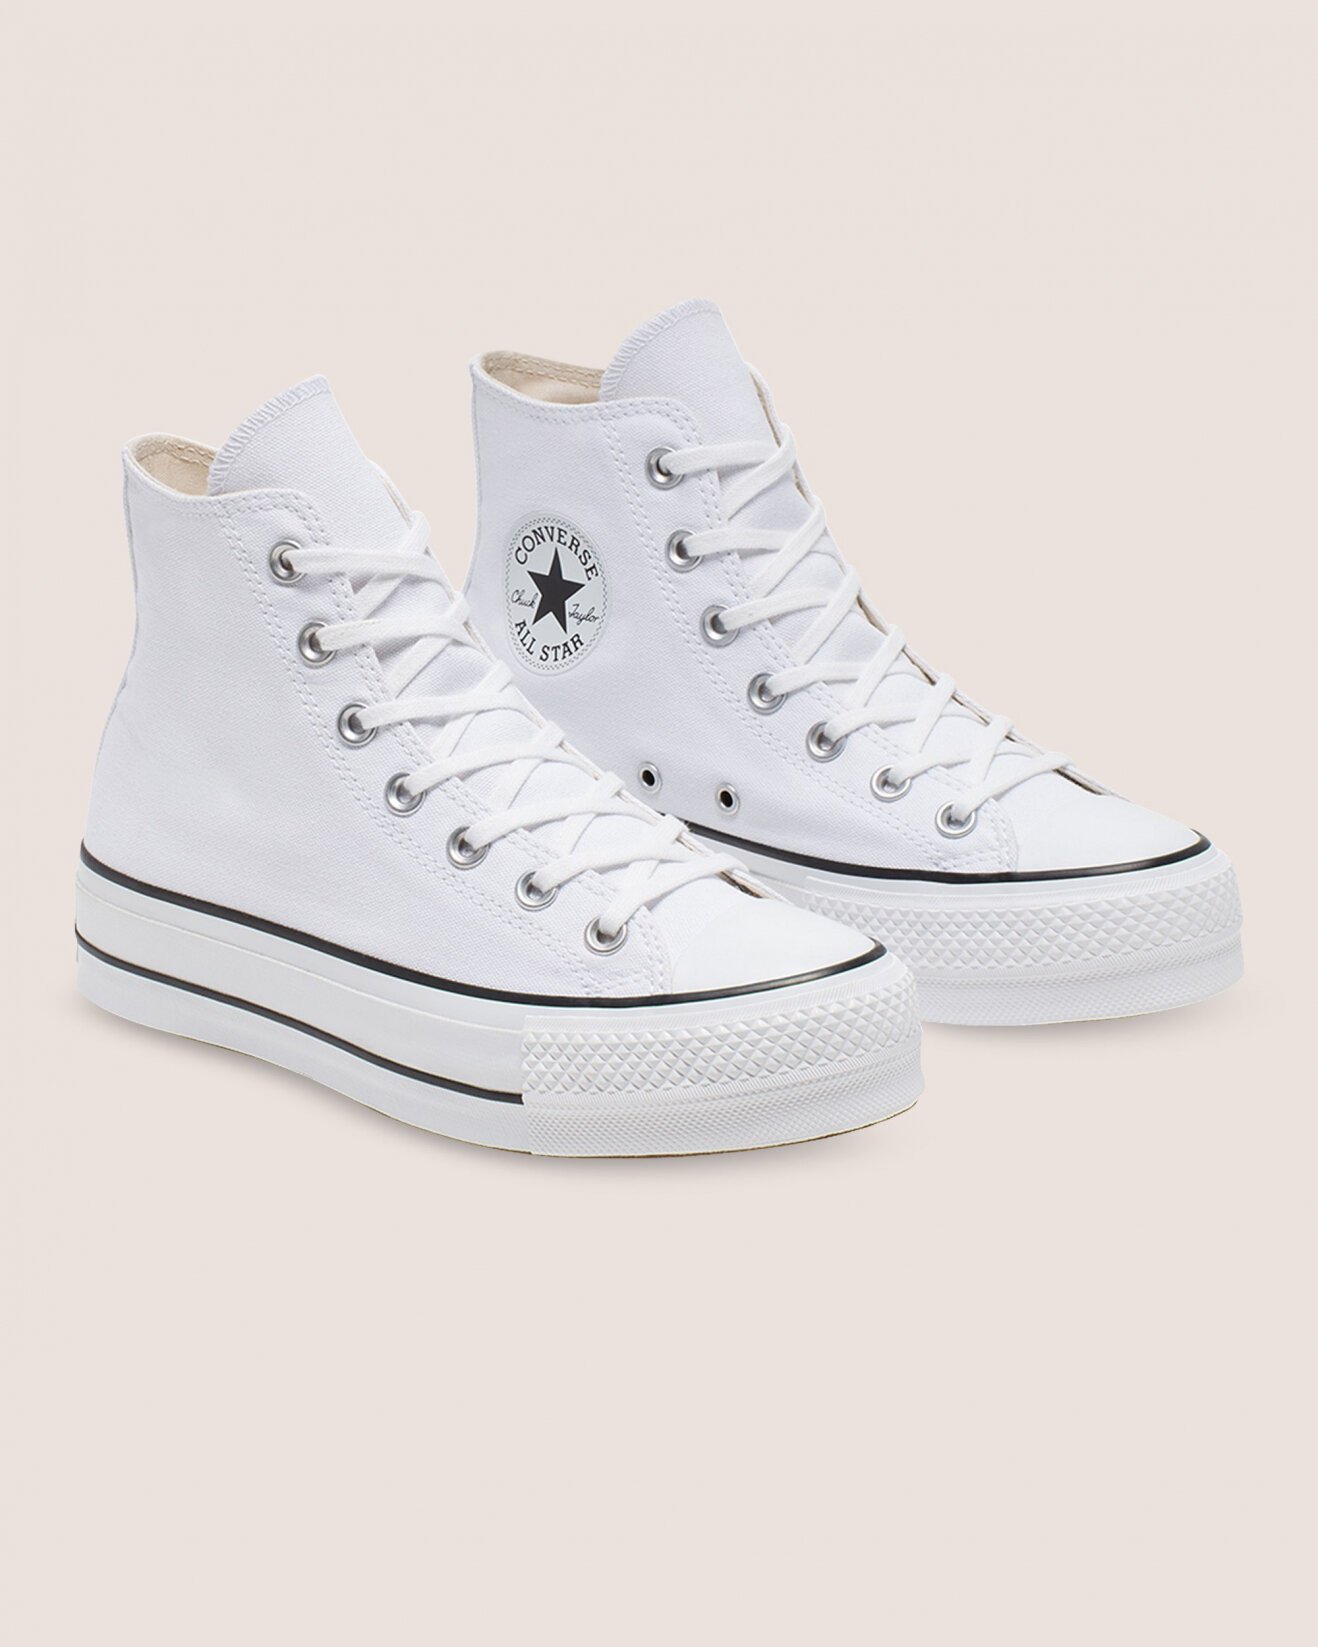 Converse Chuck Taylor All Star Canvas Lift High Top Womens - Buy Online -  Ph: 1800-370-766 - AfterPay & ZipPay Available!